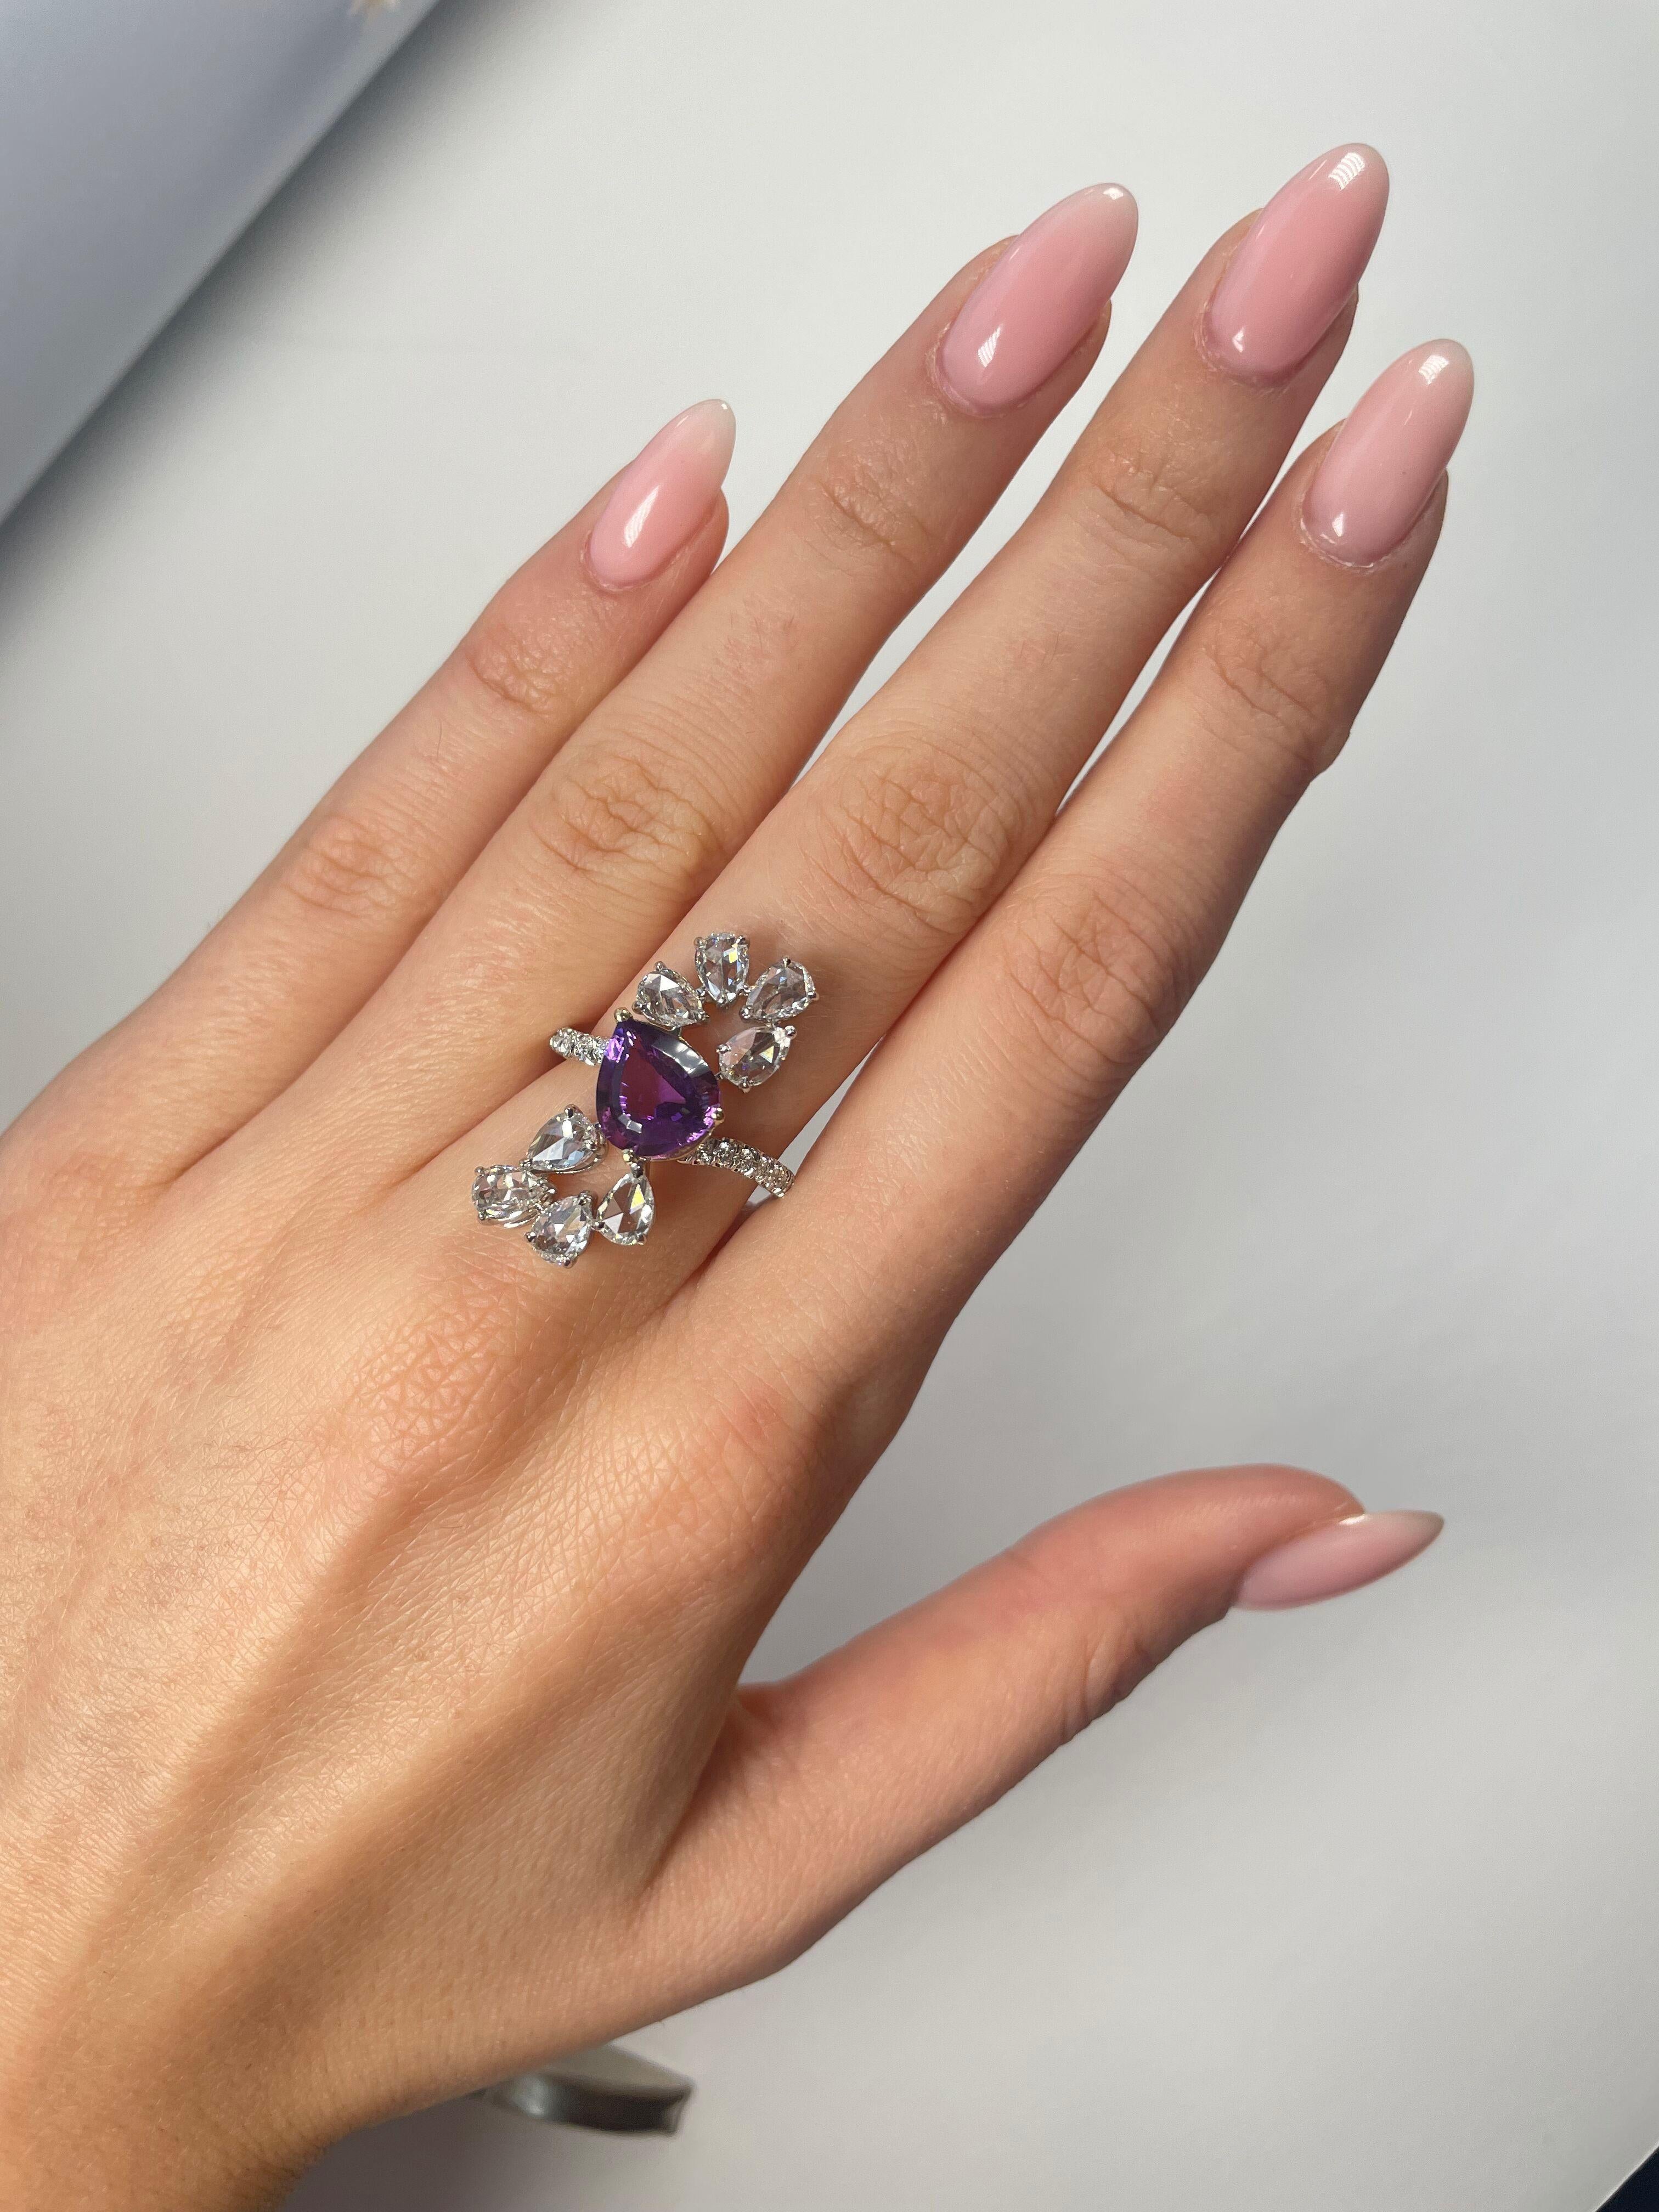 A mesmerizing in its brilliantly catching tone 2.07 Carat Pear Shaped Purple Amethyst Cocktail Ring set in a floral motif. Accentuated with 8 rose cut, pear-shaped white diamonds weighing approximately 1.68 carat. This unique and feminine ring is